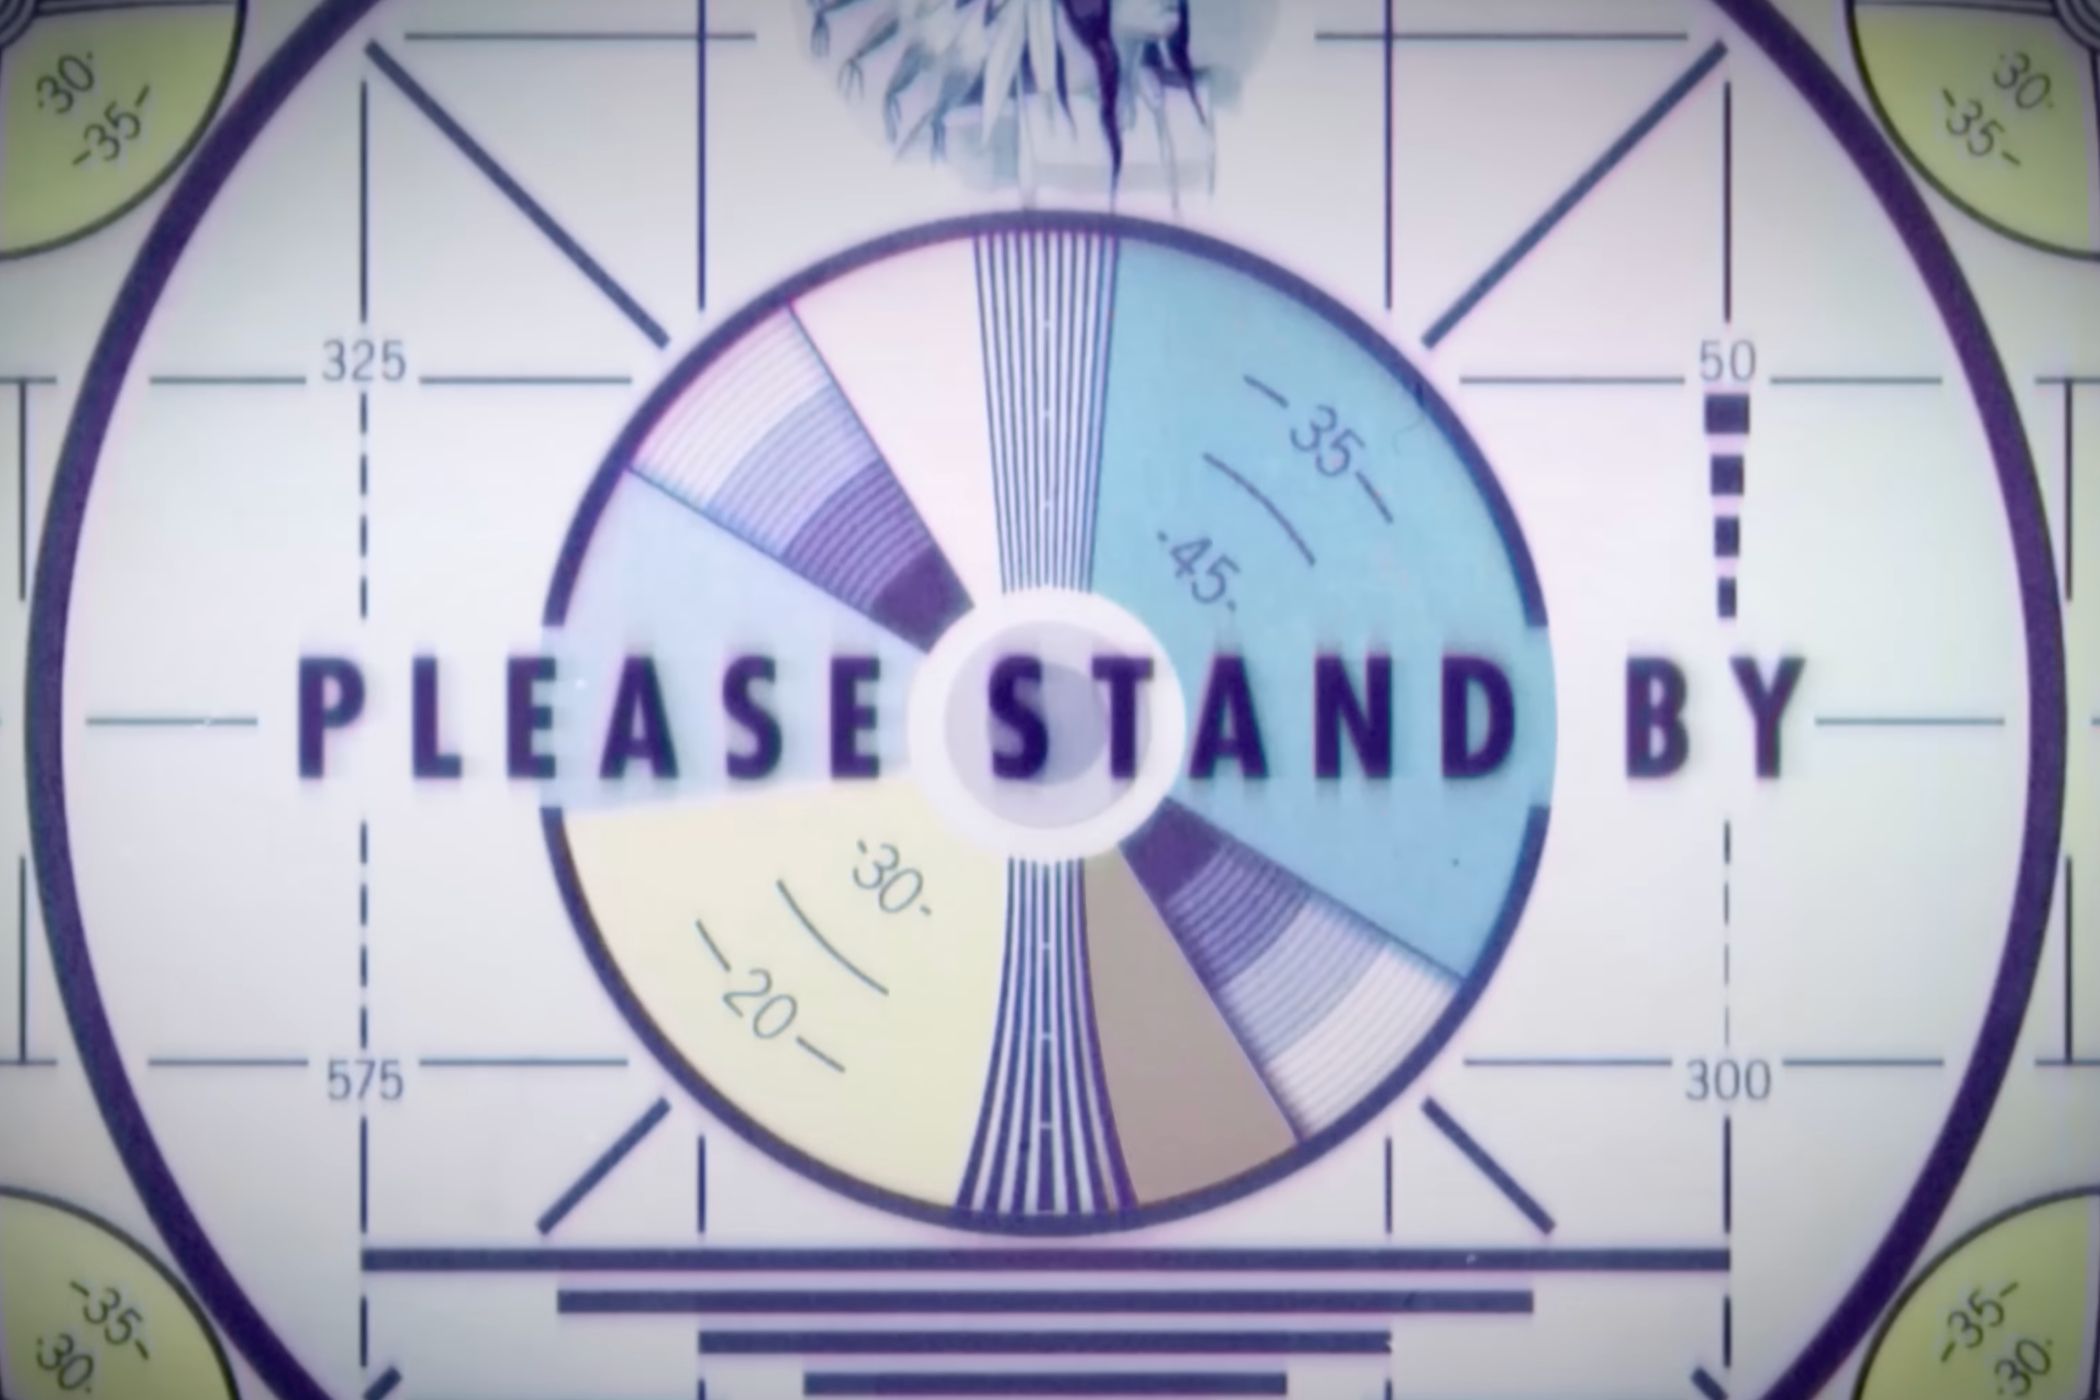 Fallout's signature 'Please Stand By' emergency broadcast system message.